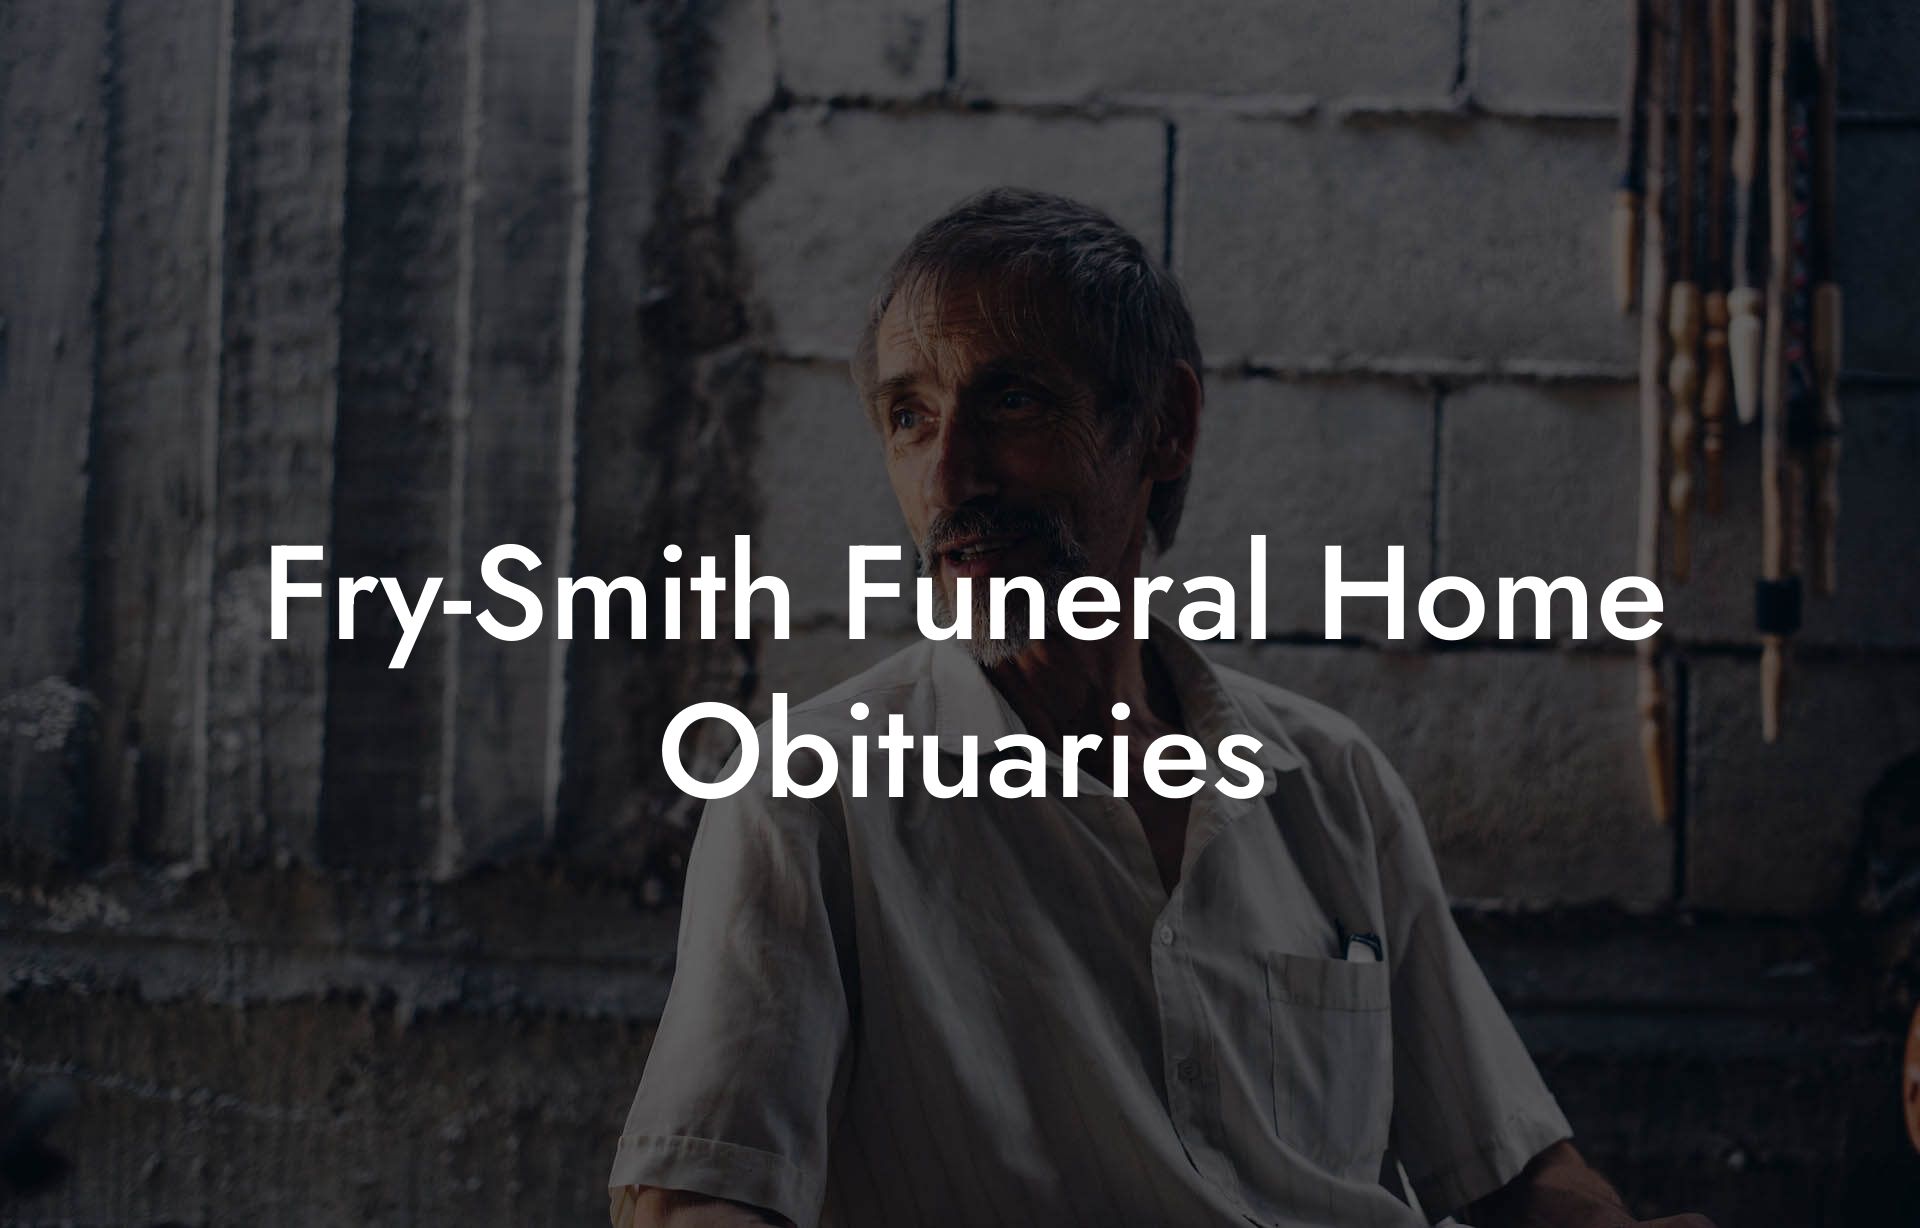 Fry-Smith Funeral Home Obituaries